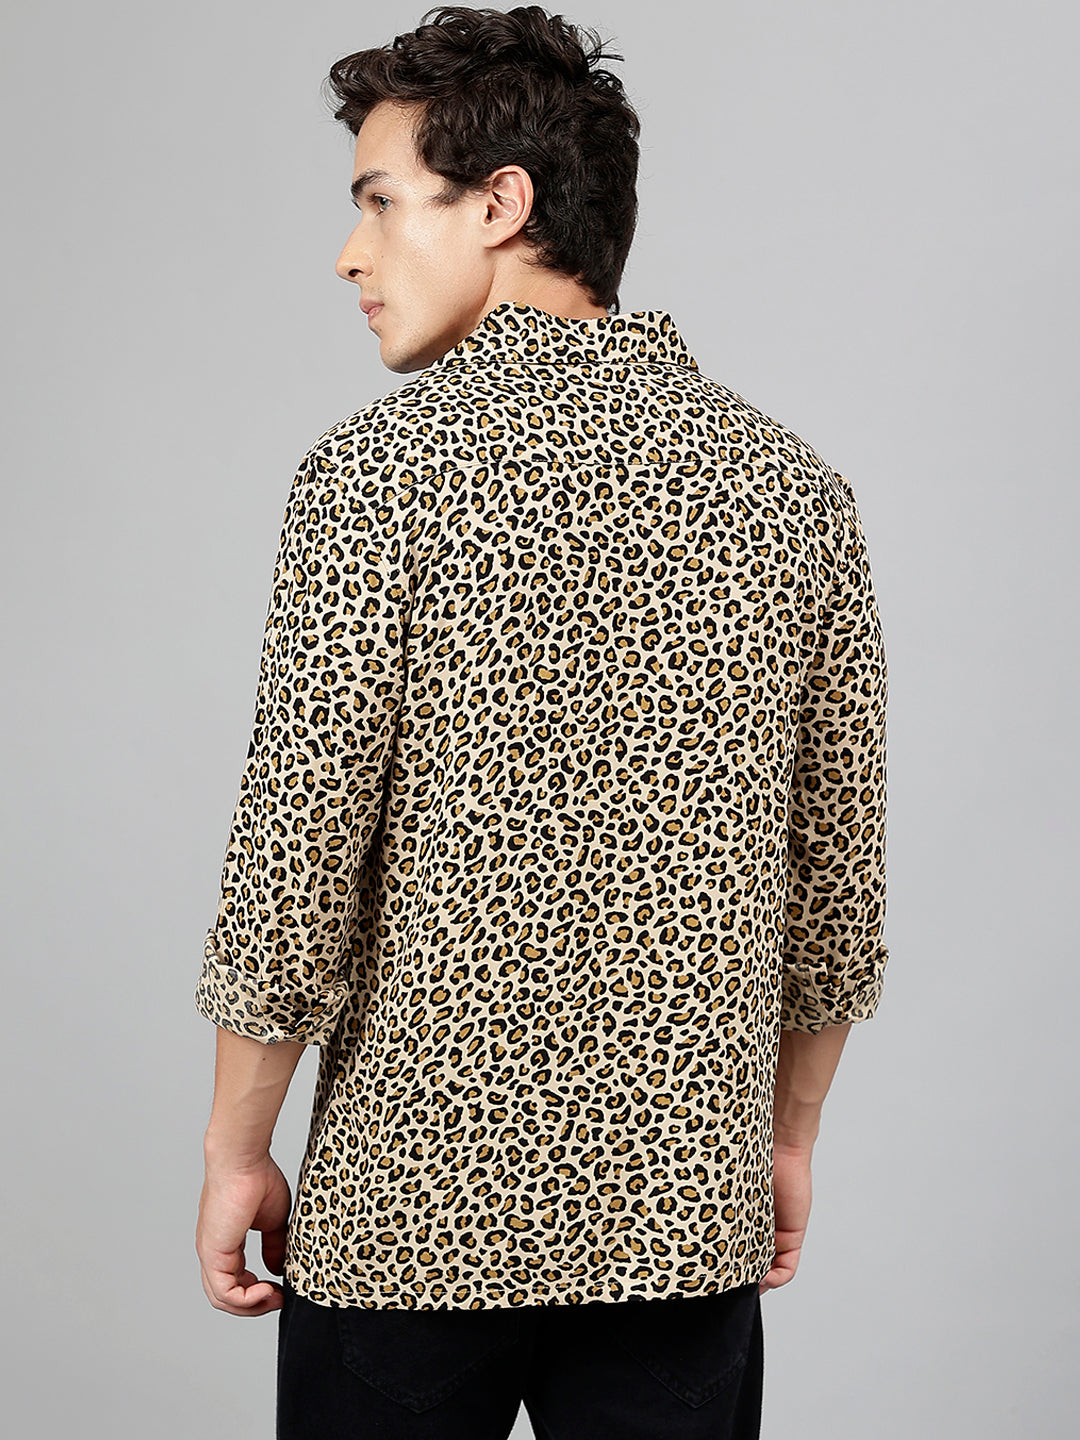 Men Beige & Black Leopard Printed Viscose Rayon Relaxed Fit Casual Resort Shirt